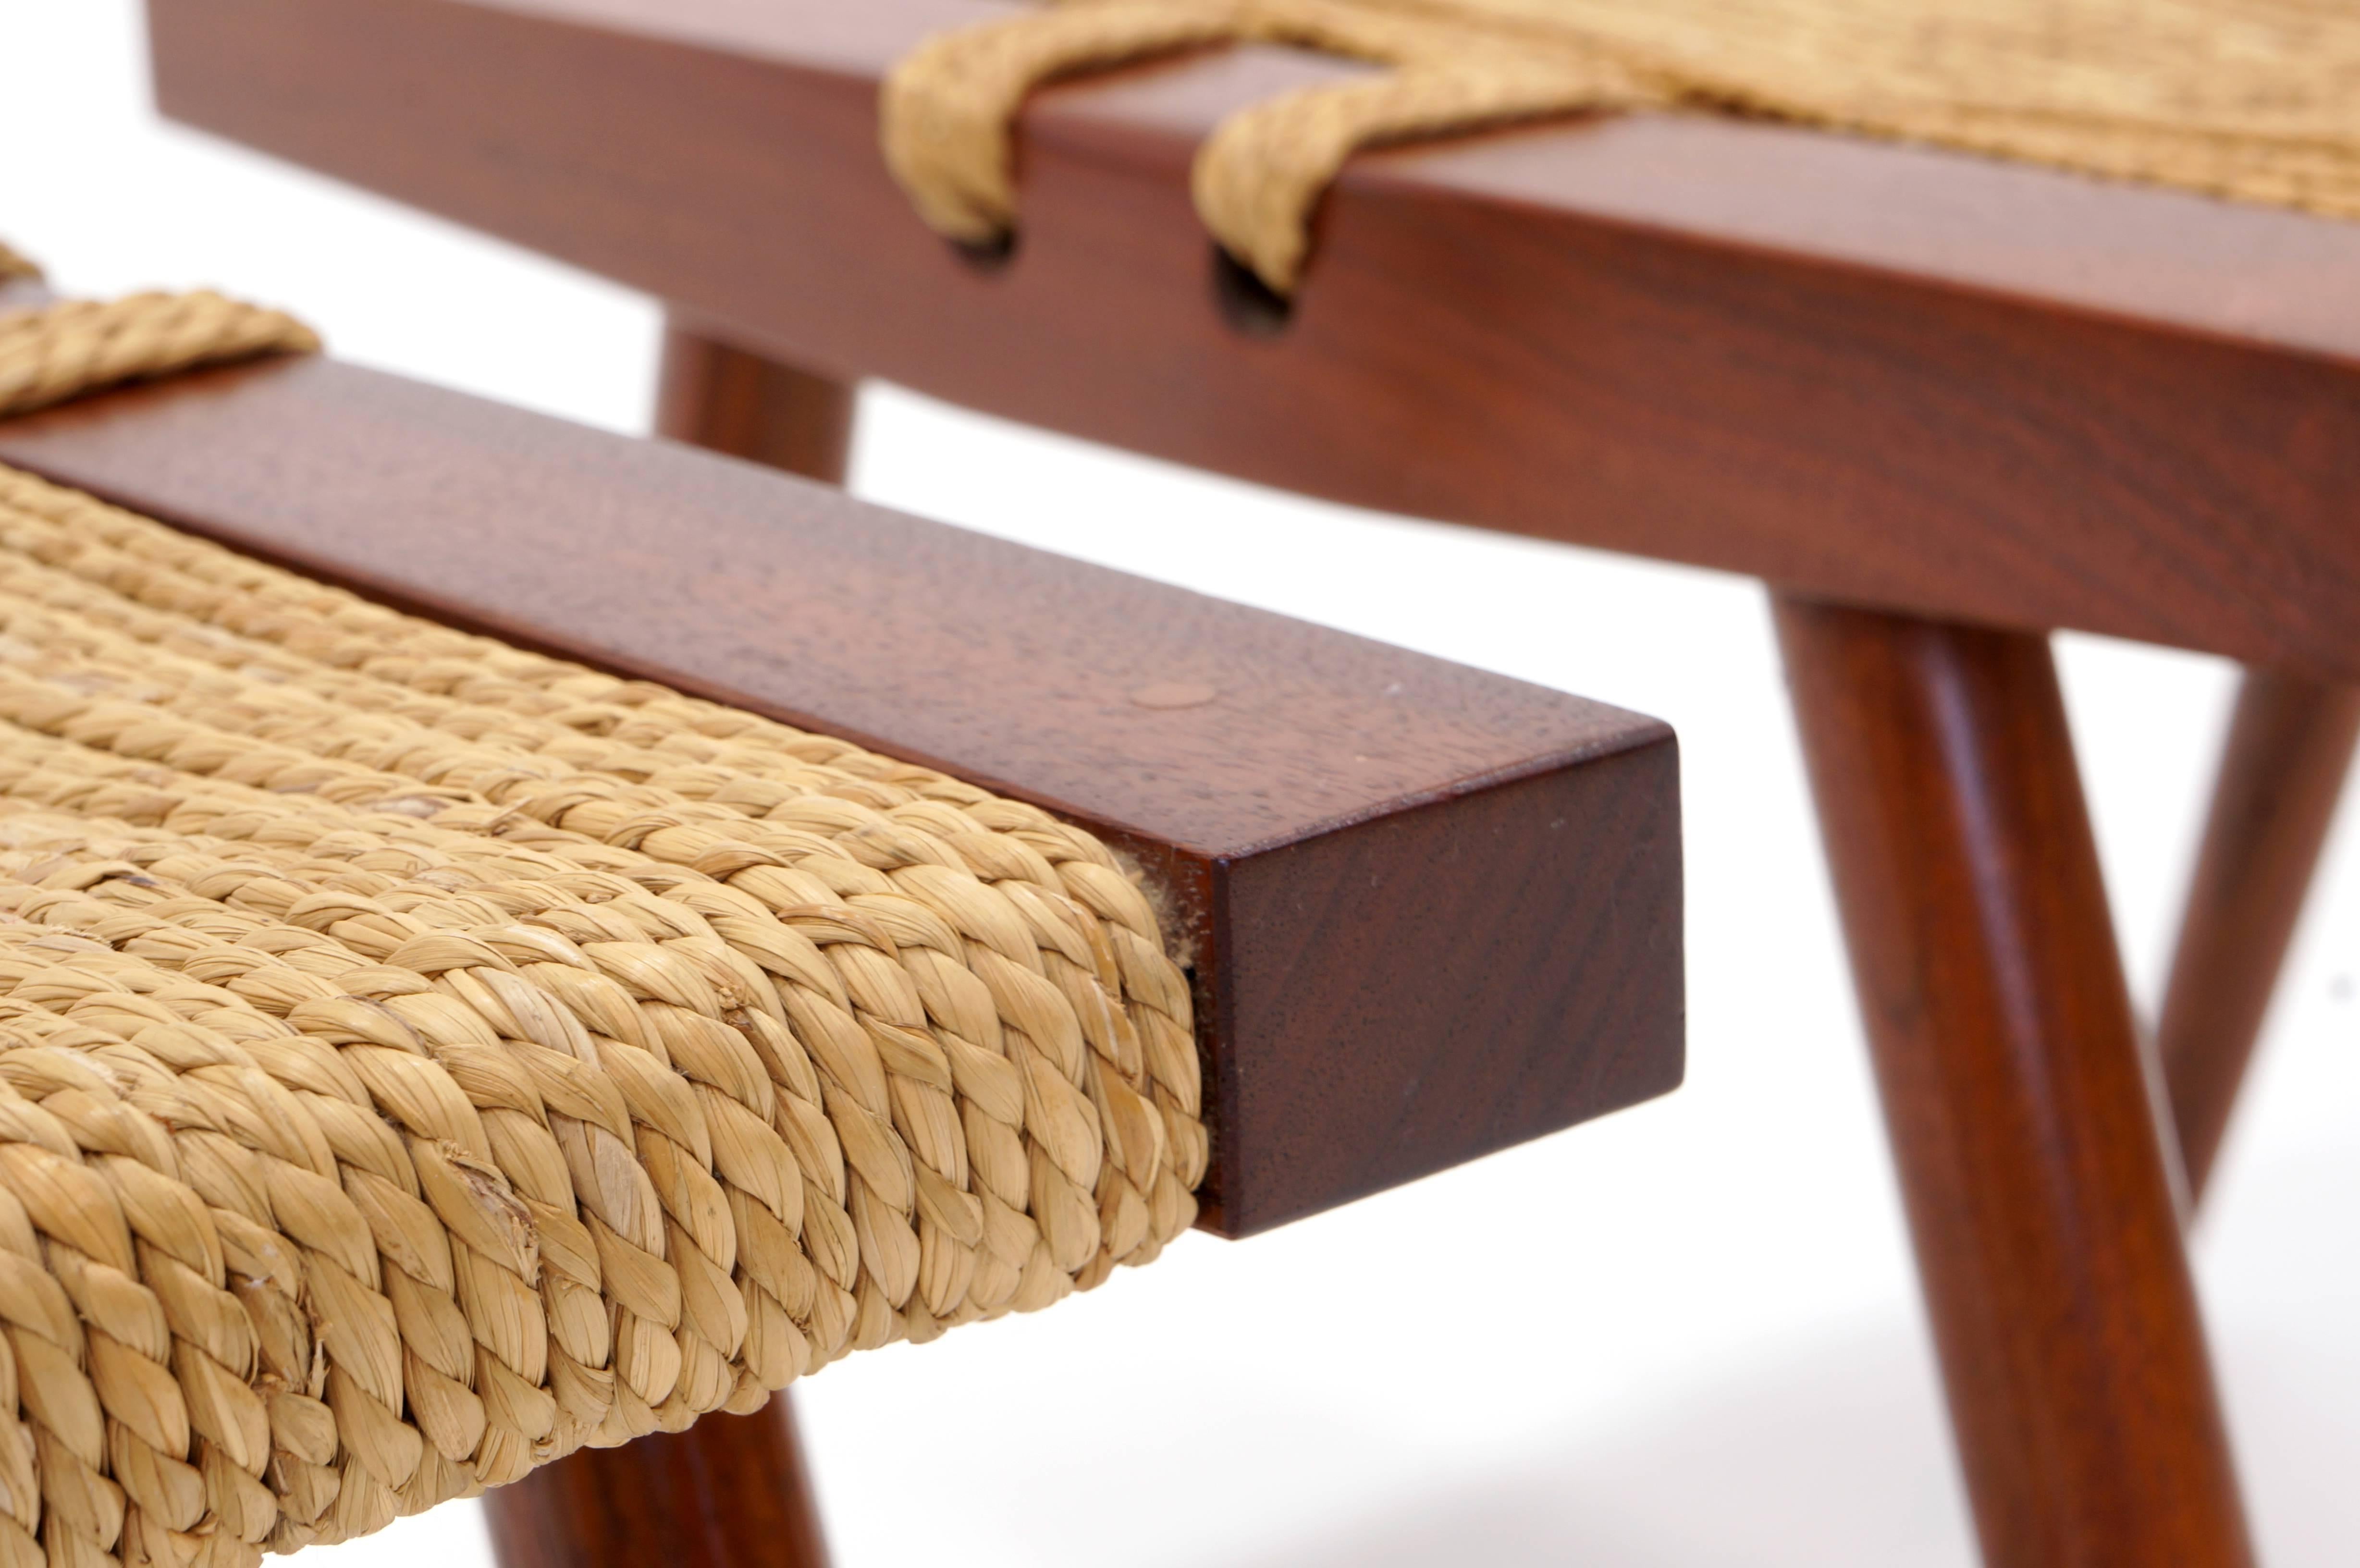 Mid-20th Century Stunning Matched Pair of George Nakashima Walnut and Grass Rope Stools, 1964.